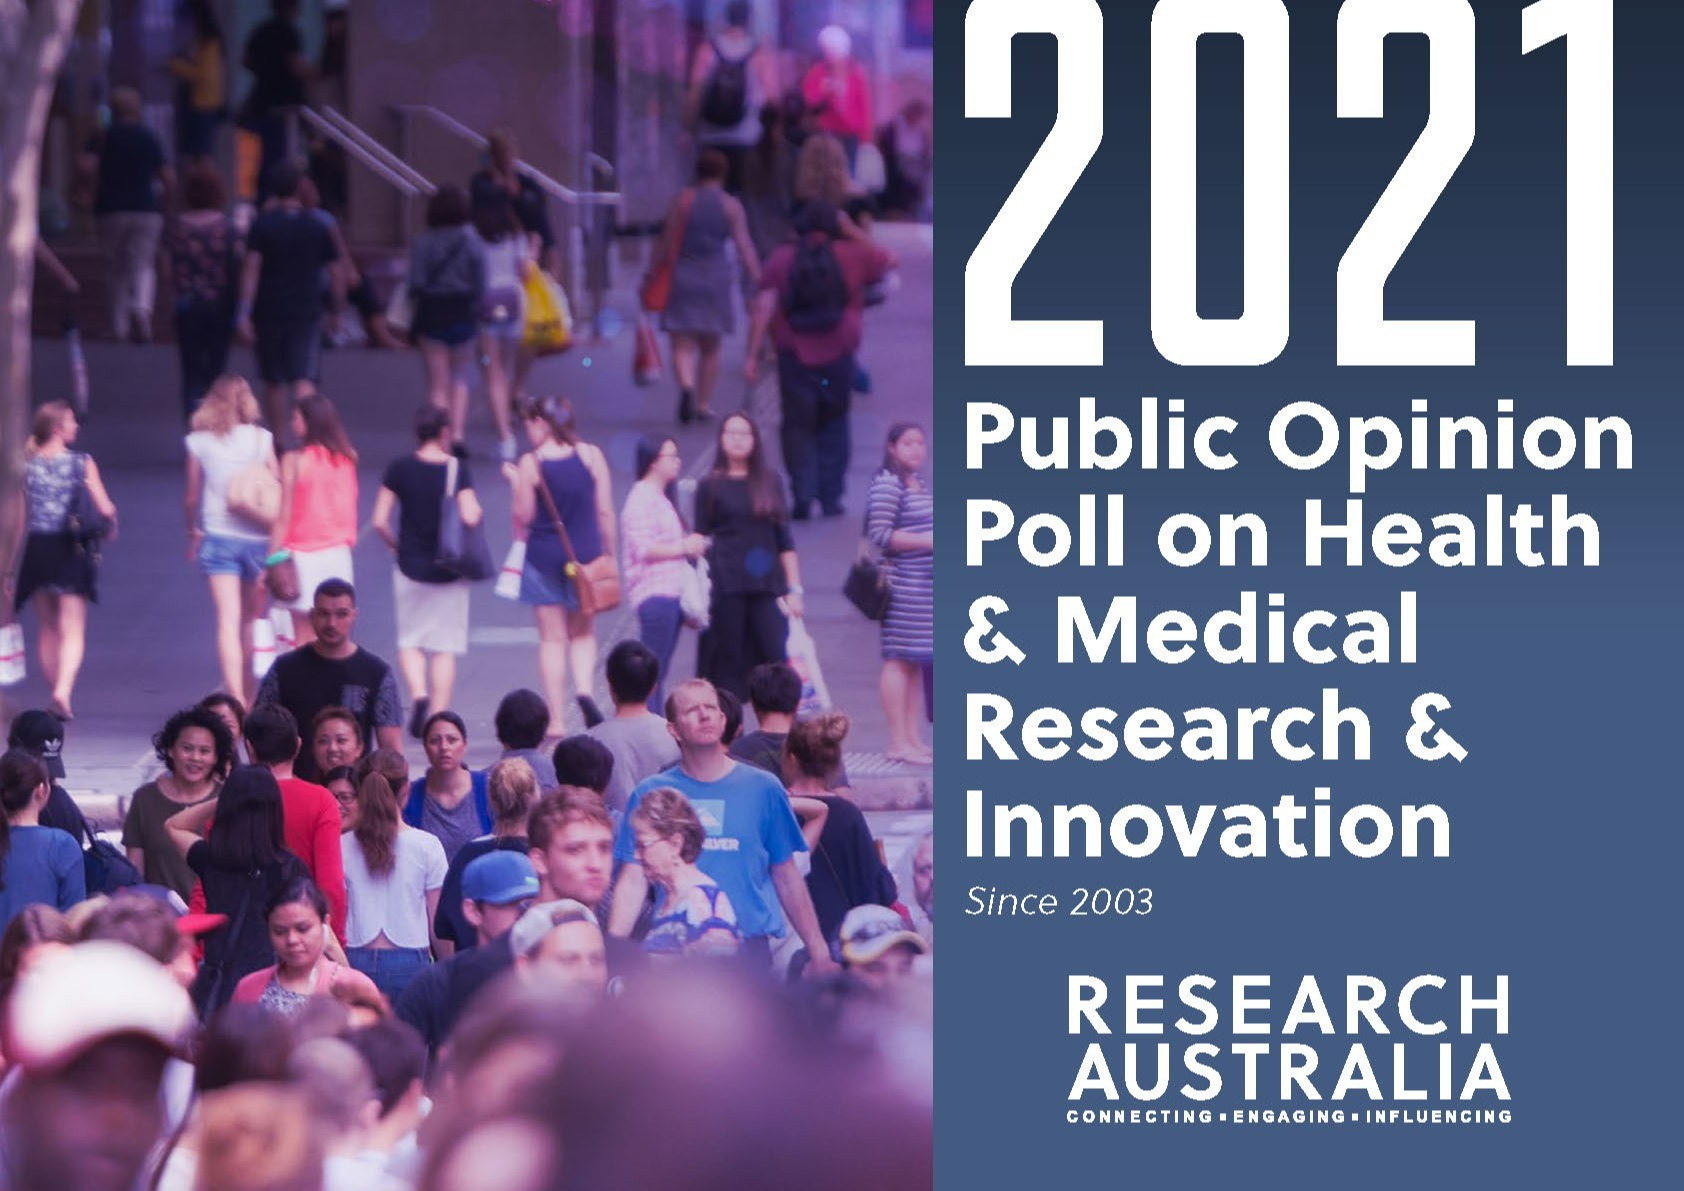 MEDIA RELEASE – AUSTRALIANS CALL FOR GREATER HEALTH AND MEDICAL RESEARCH FUNDING POST-PANDEMIC